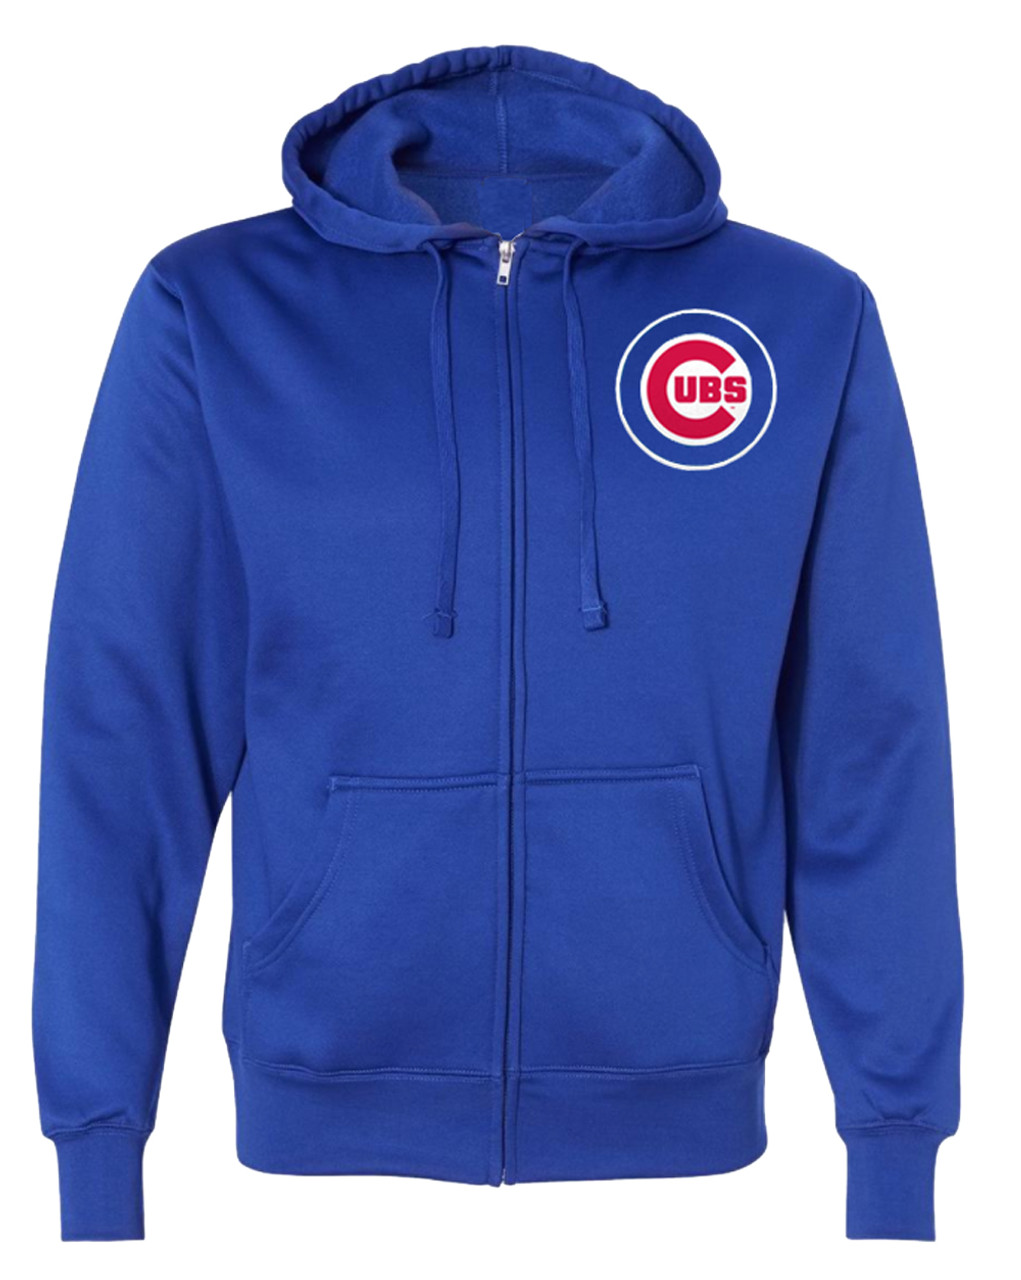 Majestic Chicago Cubs Full Zip Poly Hoodie Royal Blue 2x Black/White/Multi